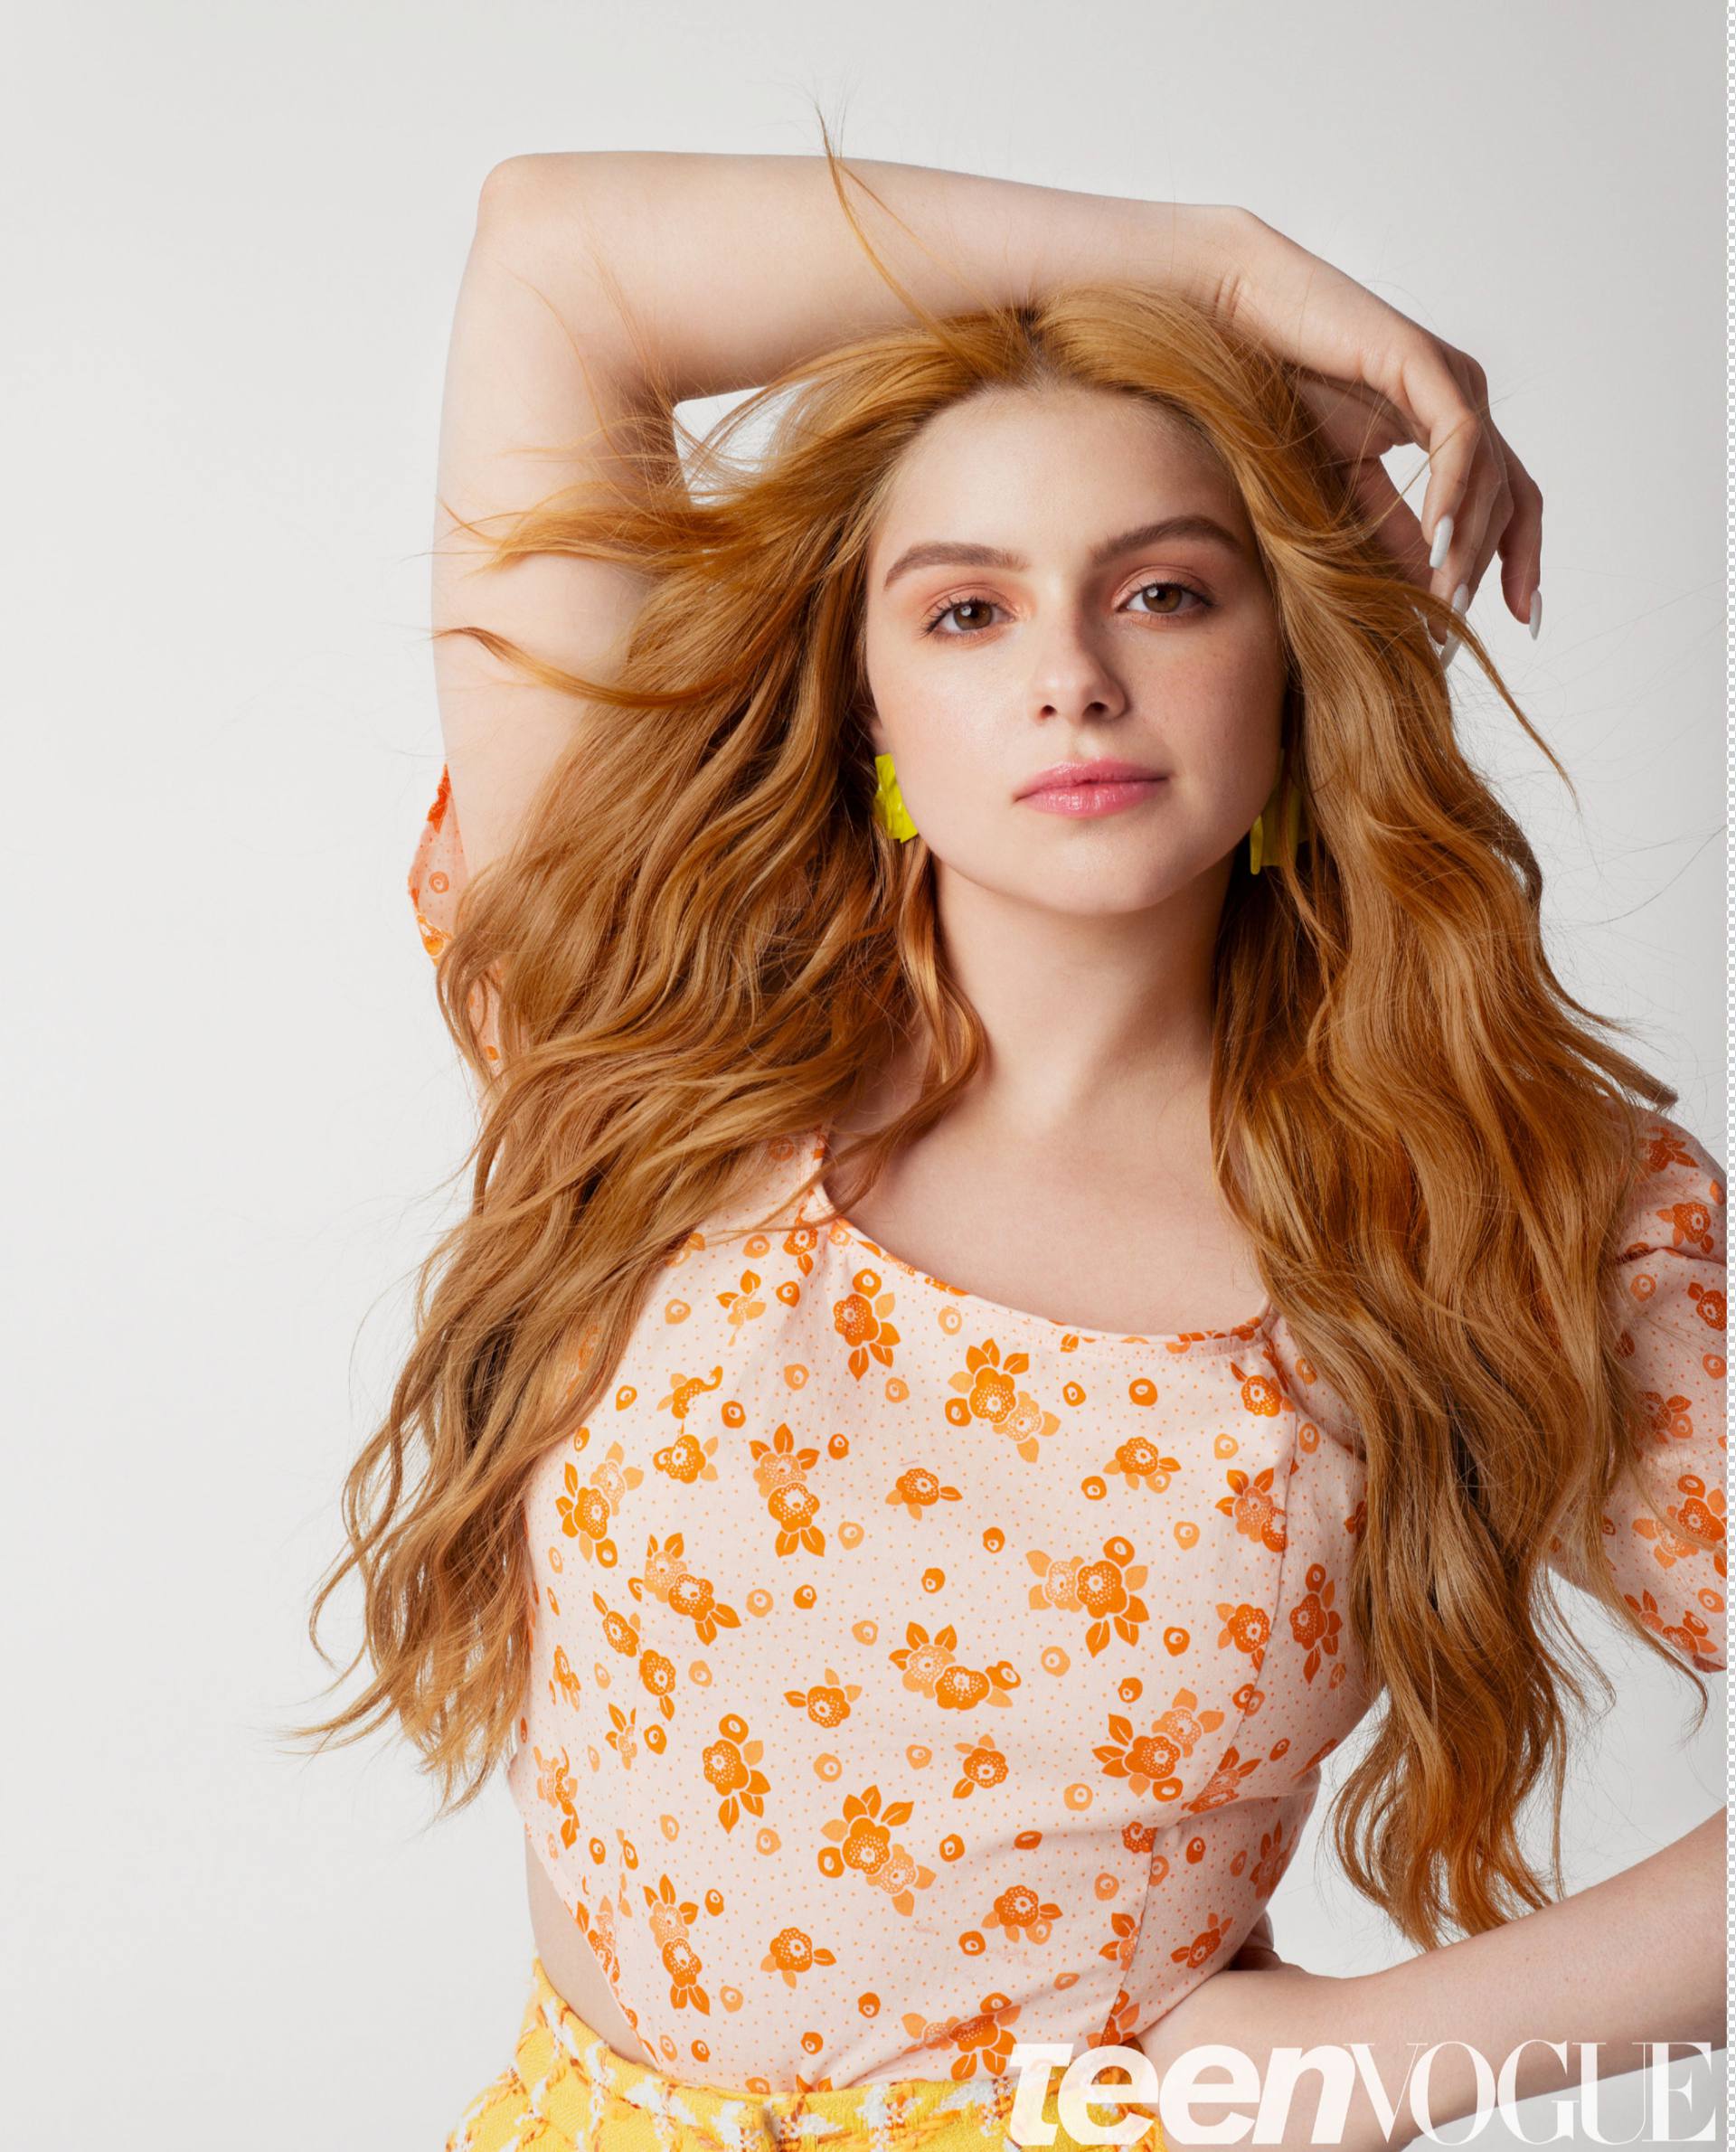 Ariel Winter Beautiful As Redhead In Photoshoot For Teen Vogue Magazine 0008